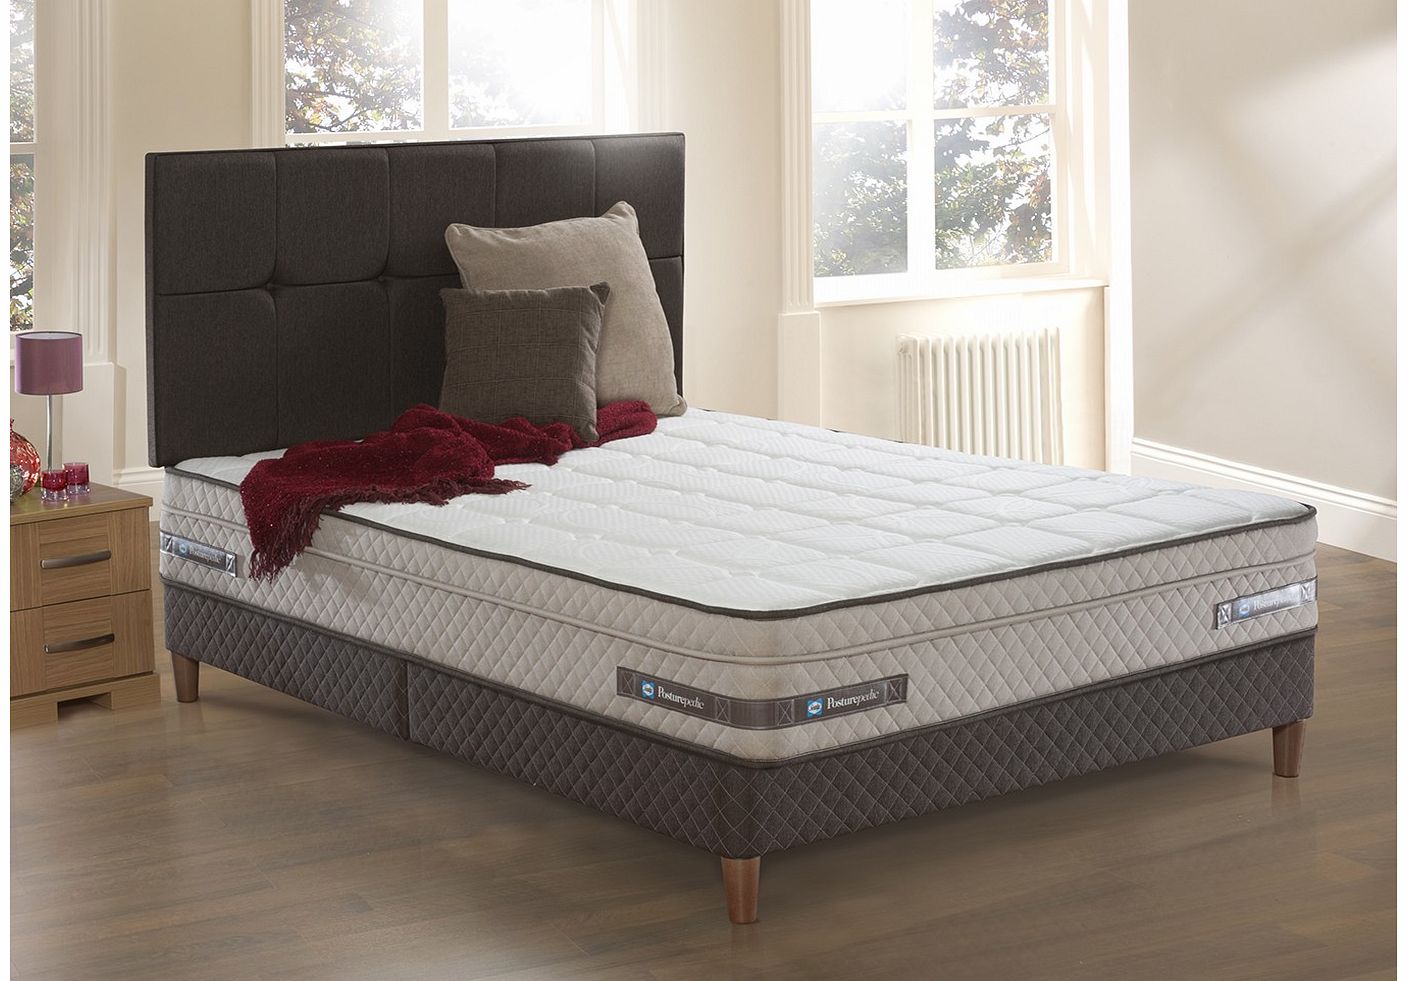 5`0 King Sealy Pattison Posturetech Spring Divan Bed with